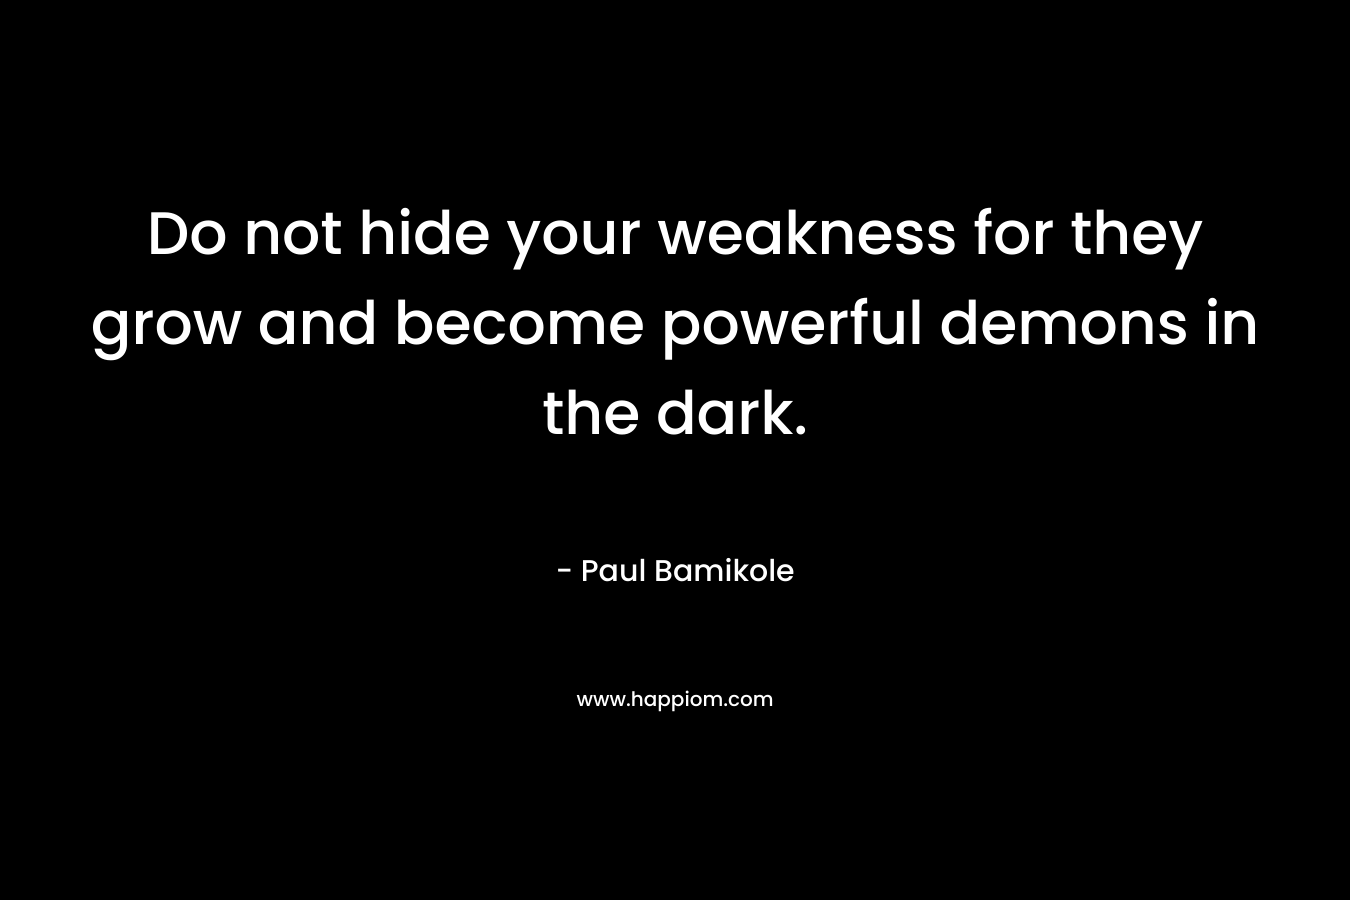 Do not hide your weakness for they grow and become powerful demons in the dark. – Paul Bamikole